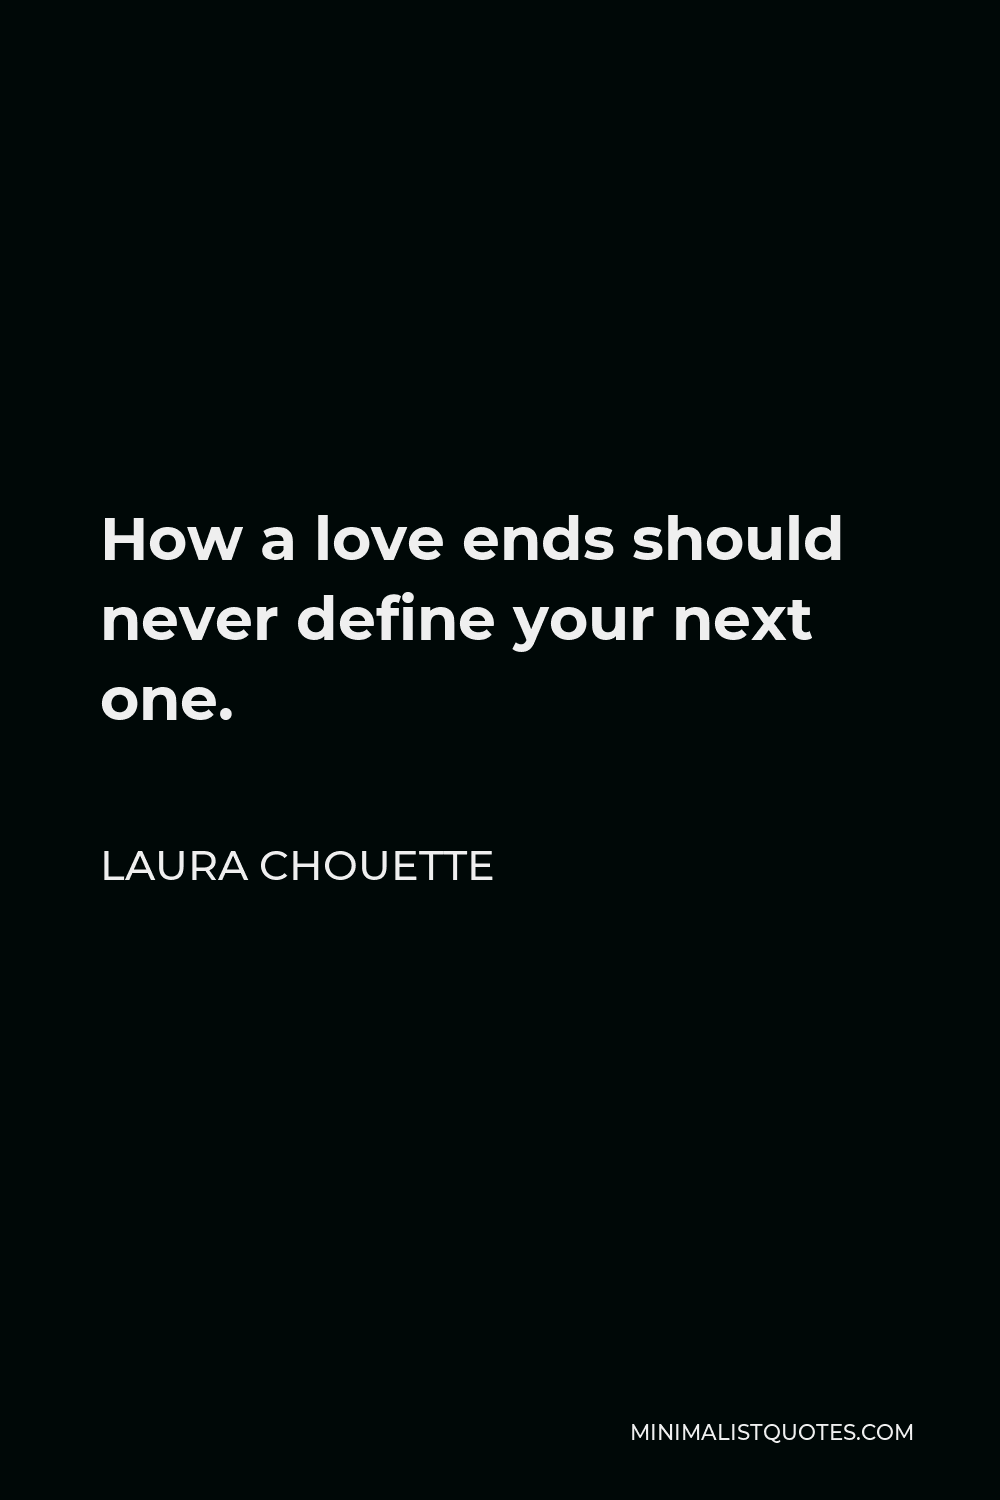 Laura Chouette Quote - How a love ends should never define your next one.